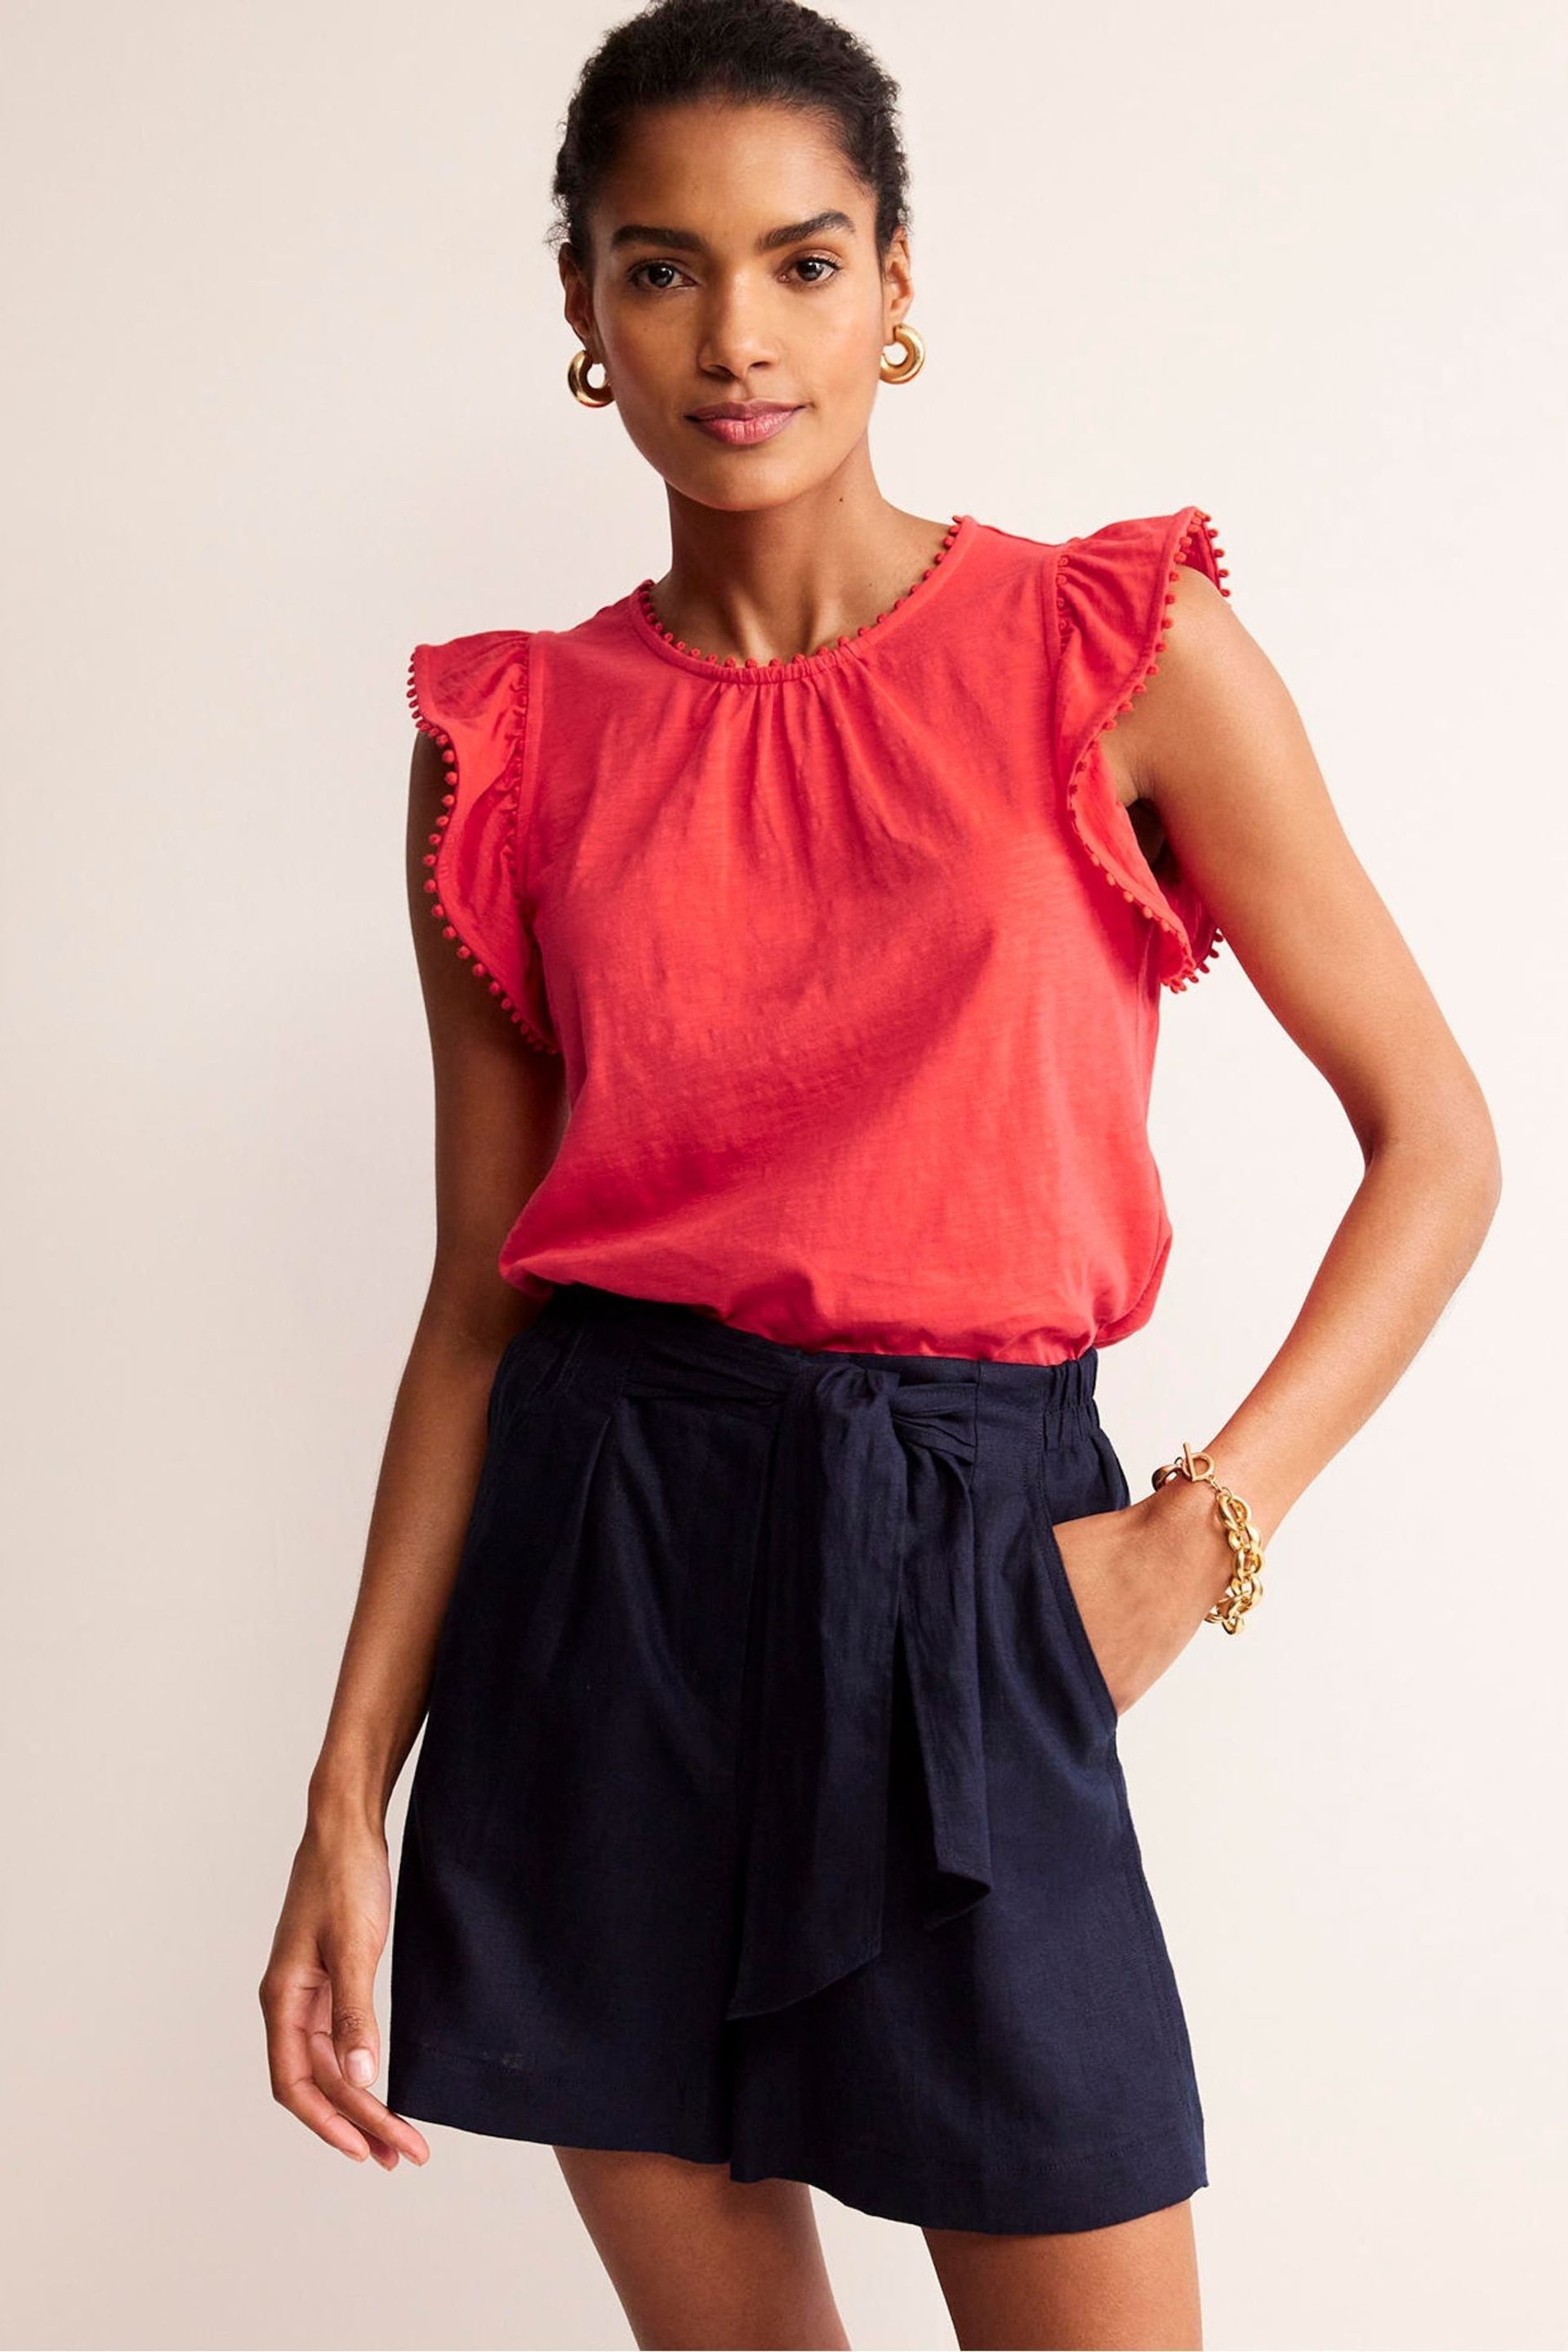 Boden Red Pom Trim Ruffle Sleeve Top - Image 1 of 4